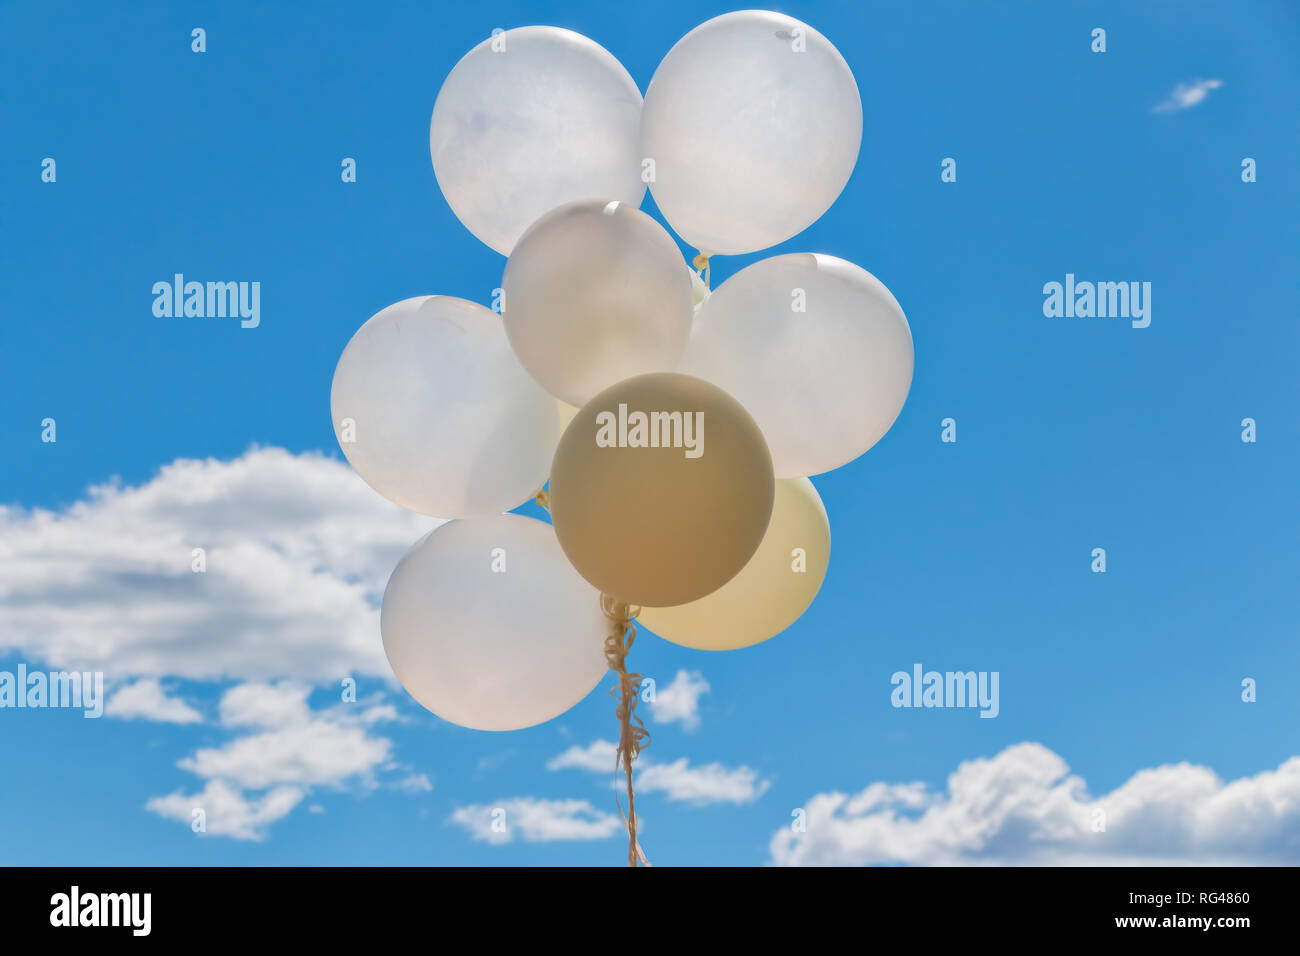 group of white balloons against blue summer sky with clouds Stock Photo